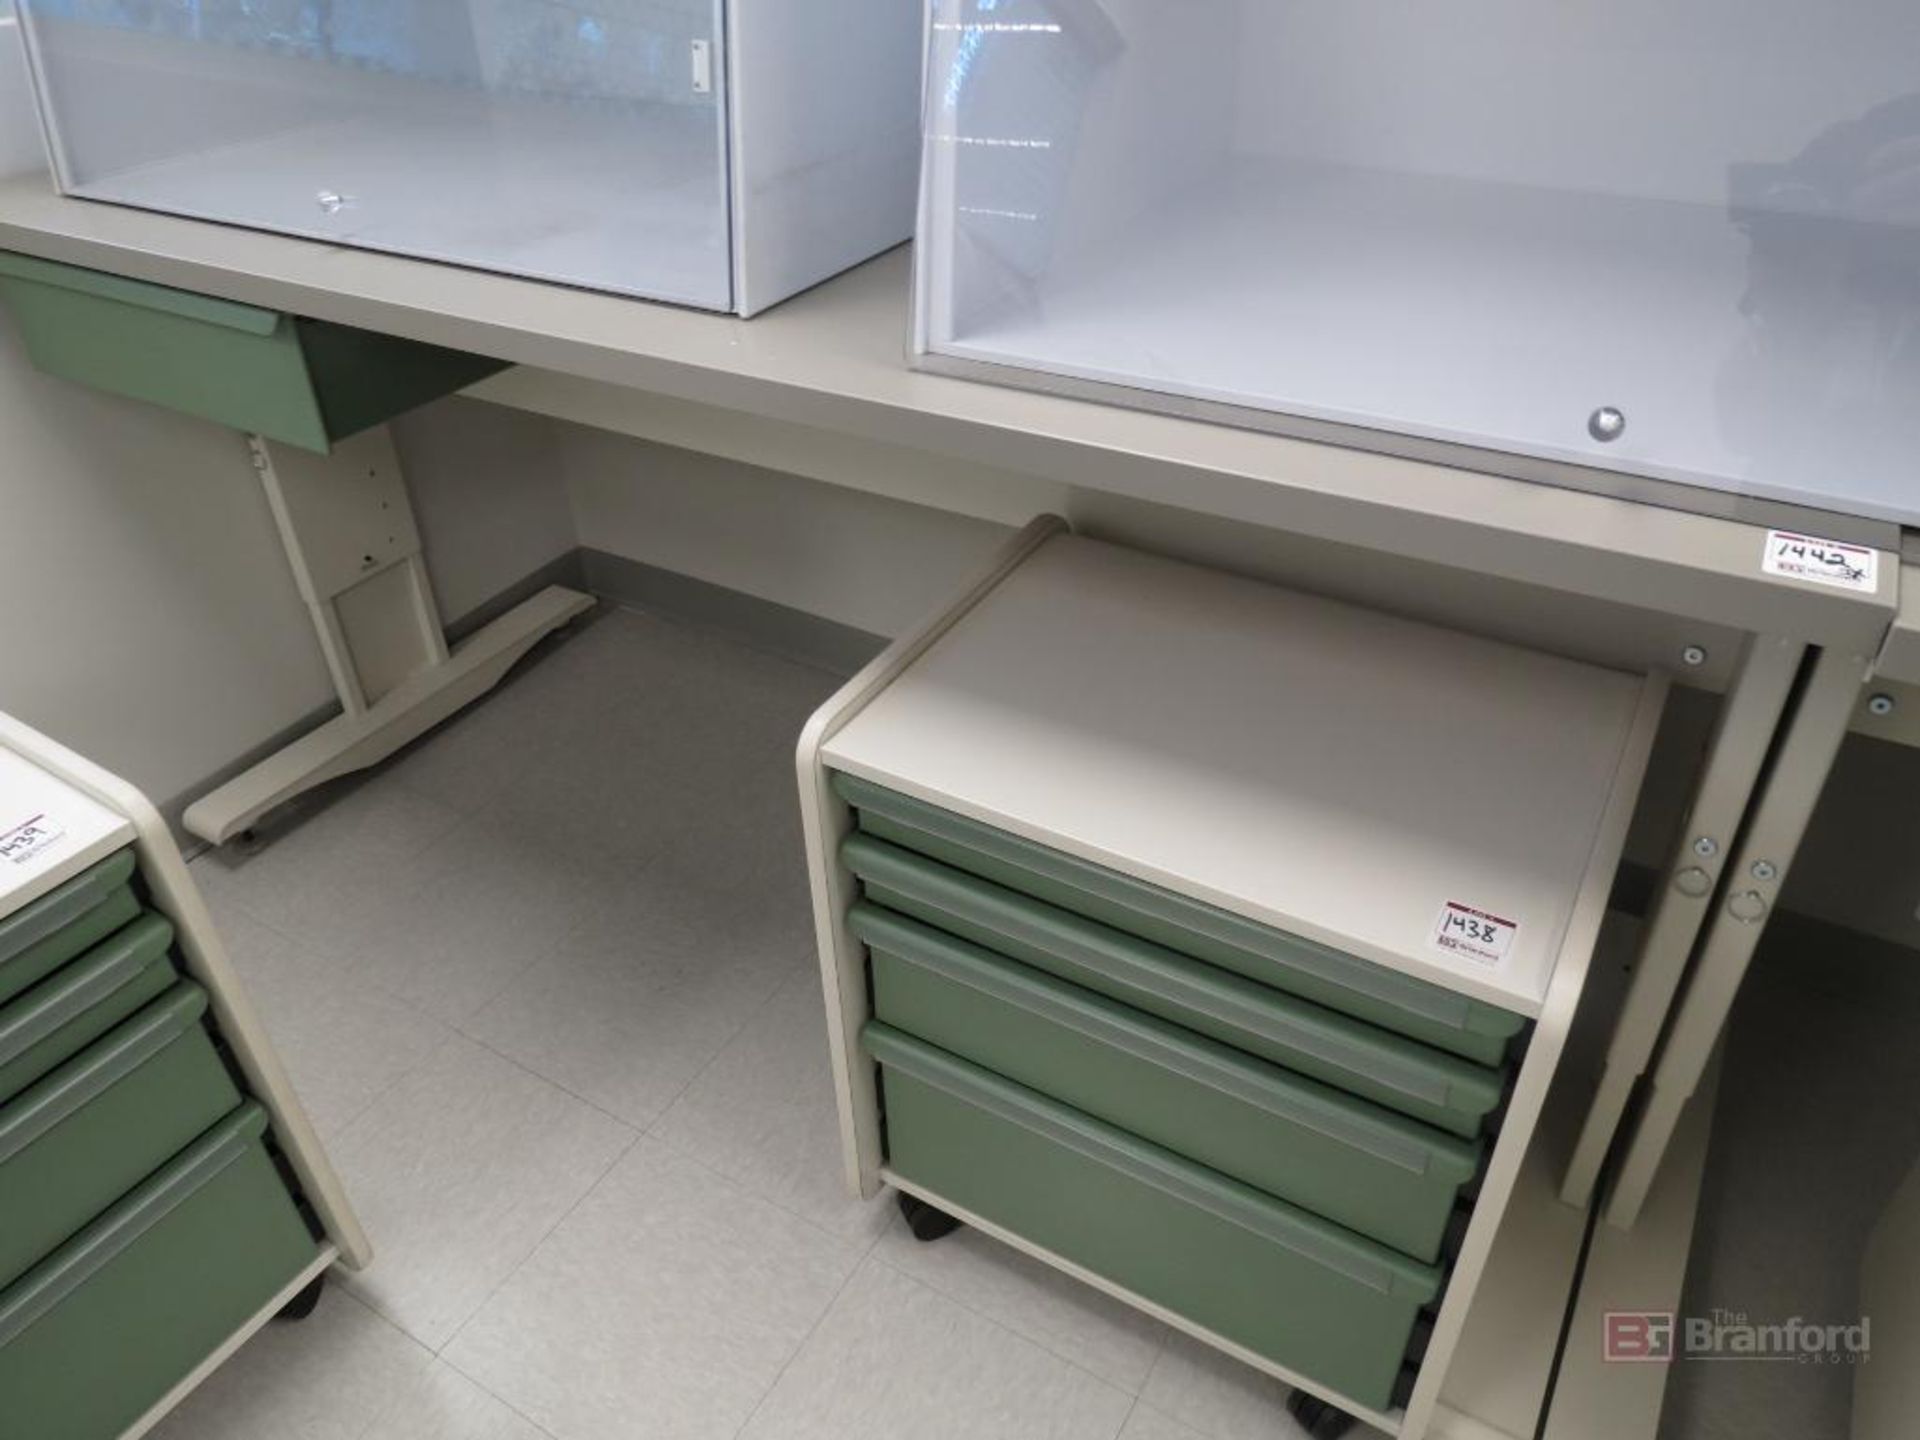 Lot of (3) Herman Miller for Healthcare Lab/Medical Benches - Image 2 of 5